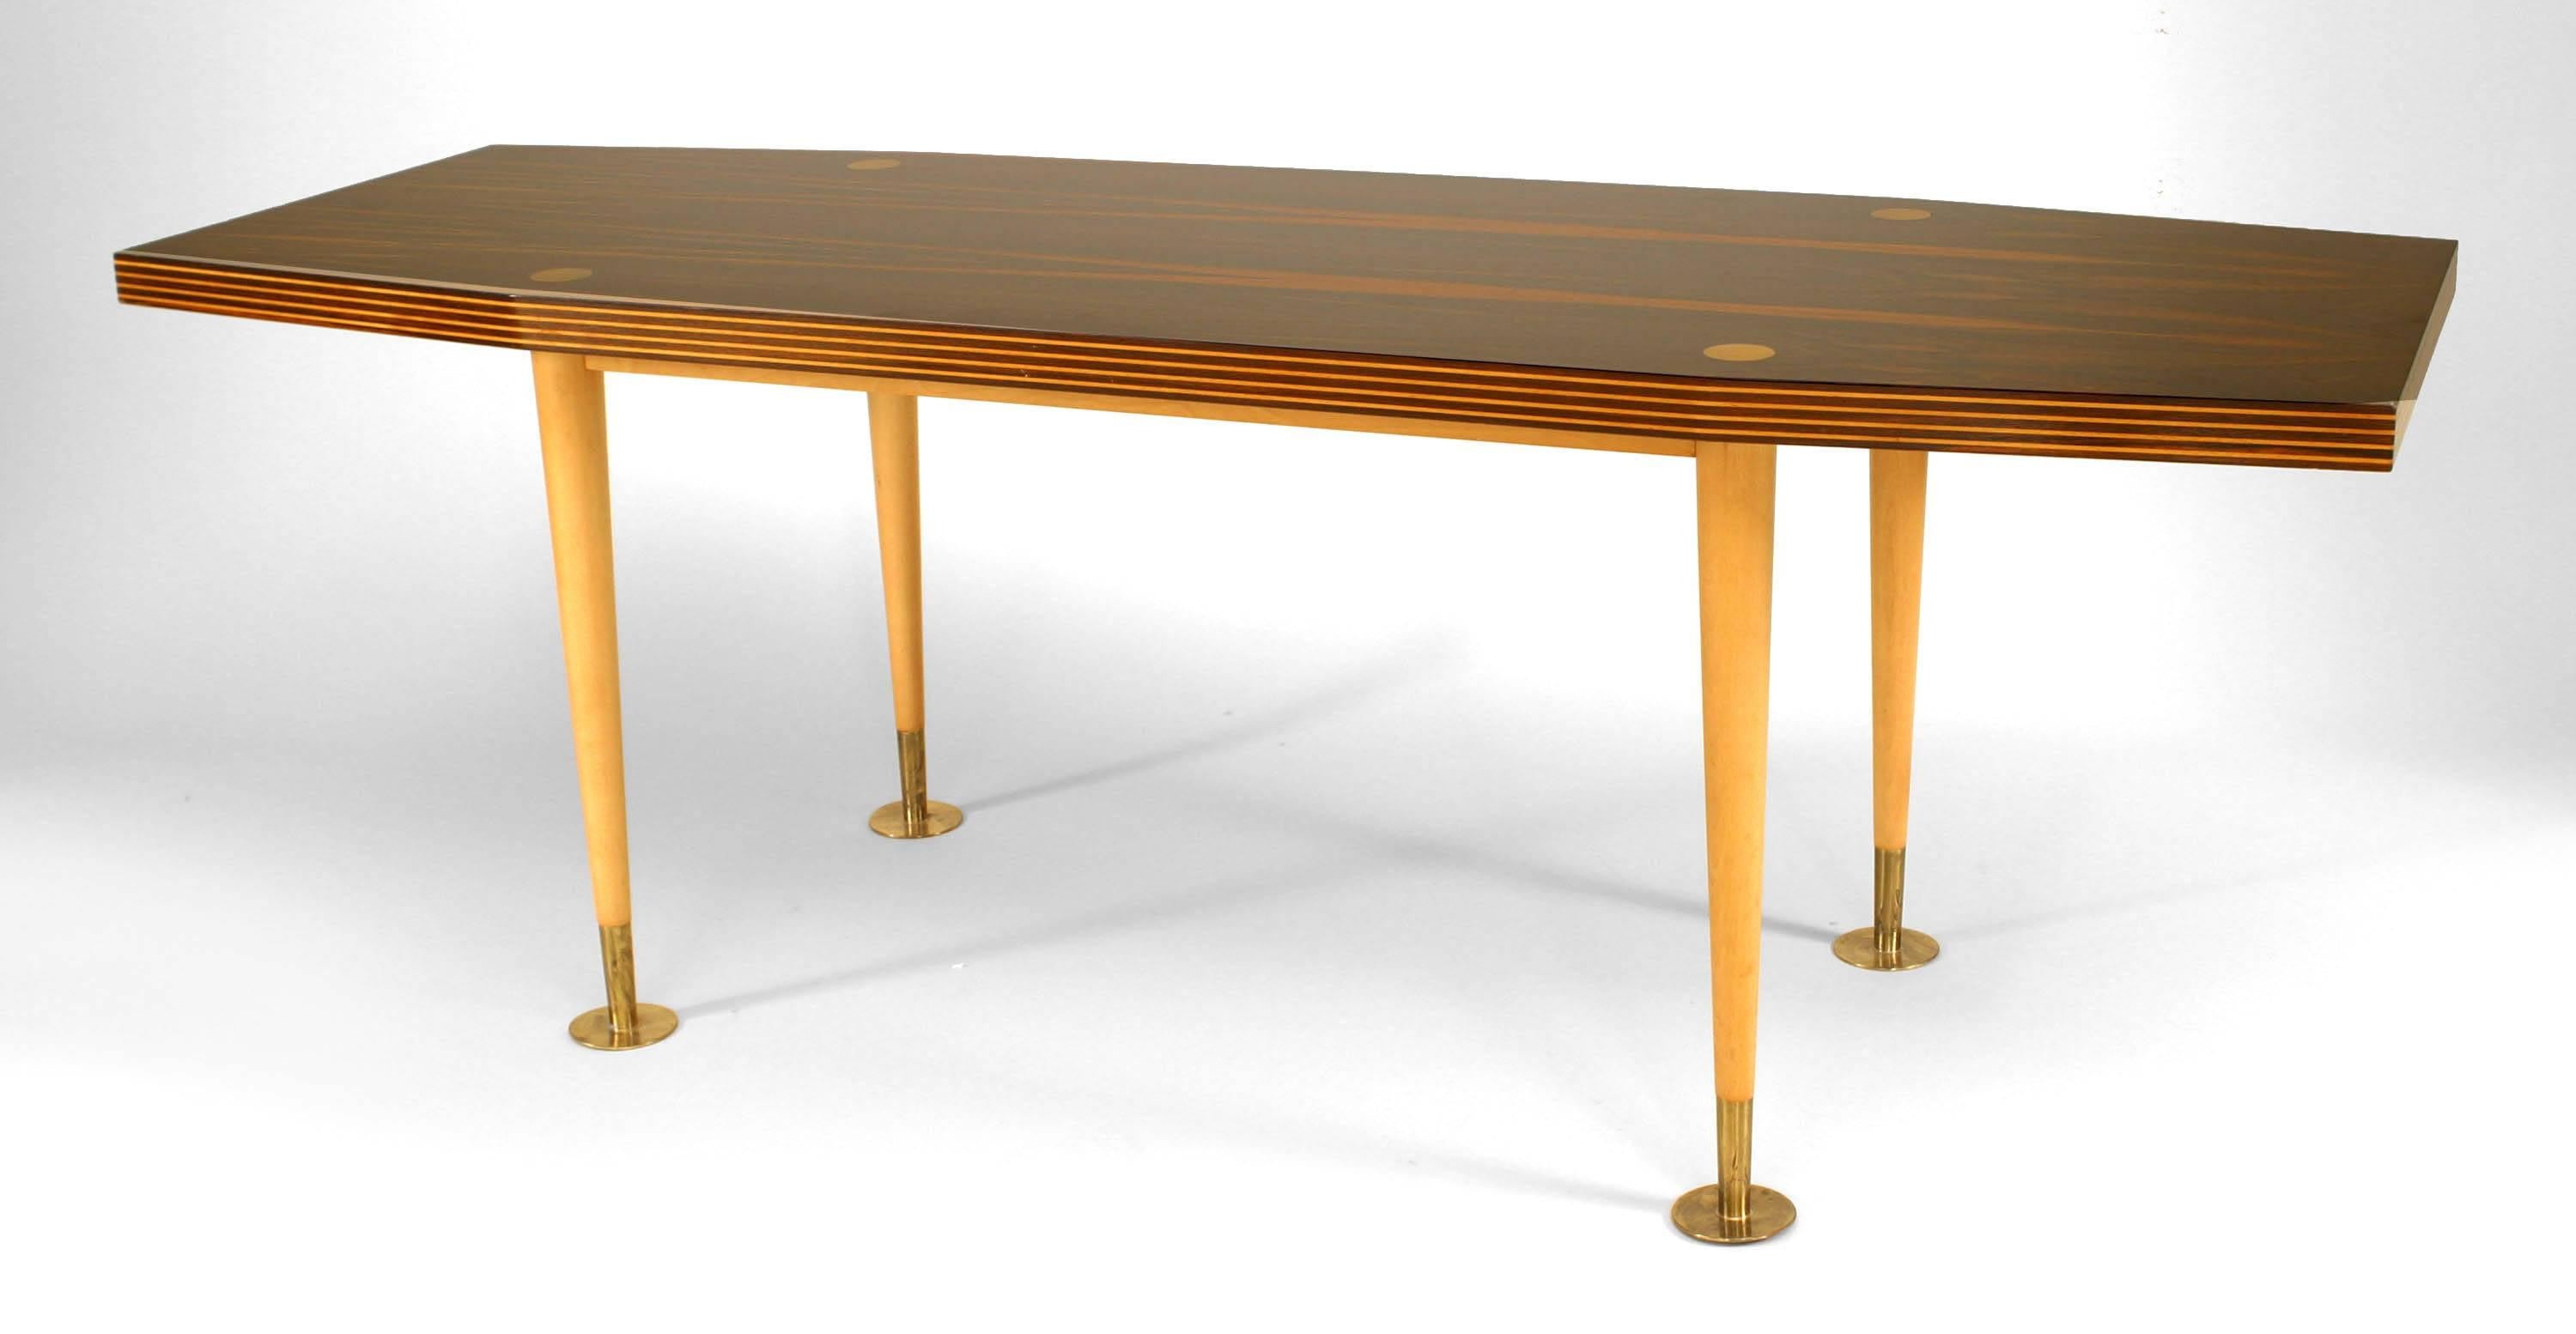 Italian Post-War Modern Design (1950/60s) palisander top coffee table with maple trimmed fluted edge and tapered cone form sycamore legs ending with brass circular pad feet.
  